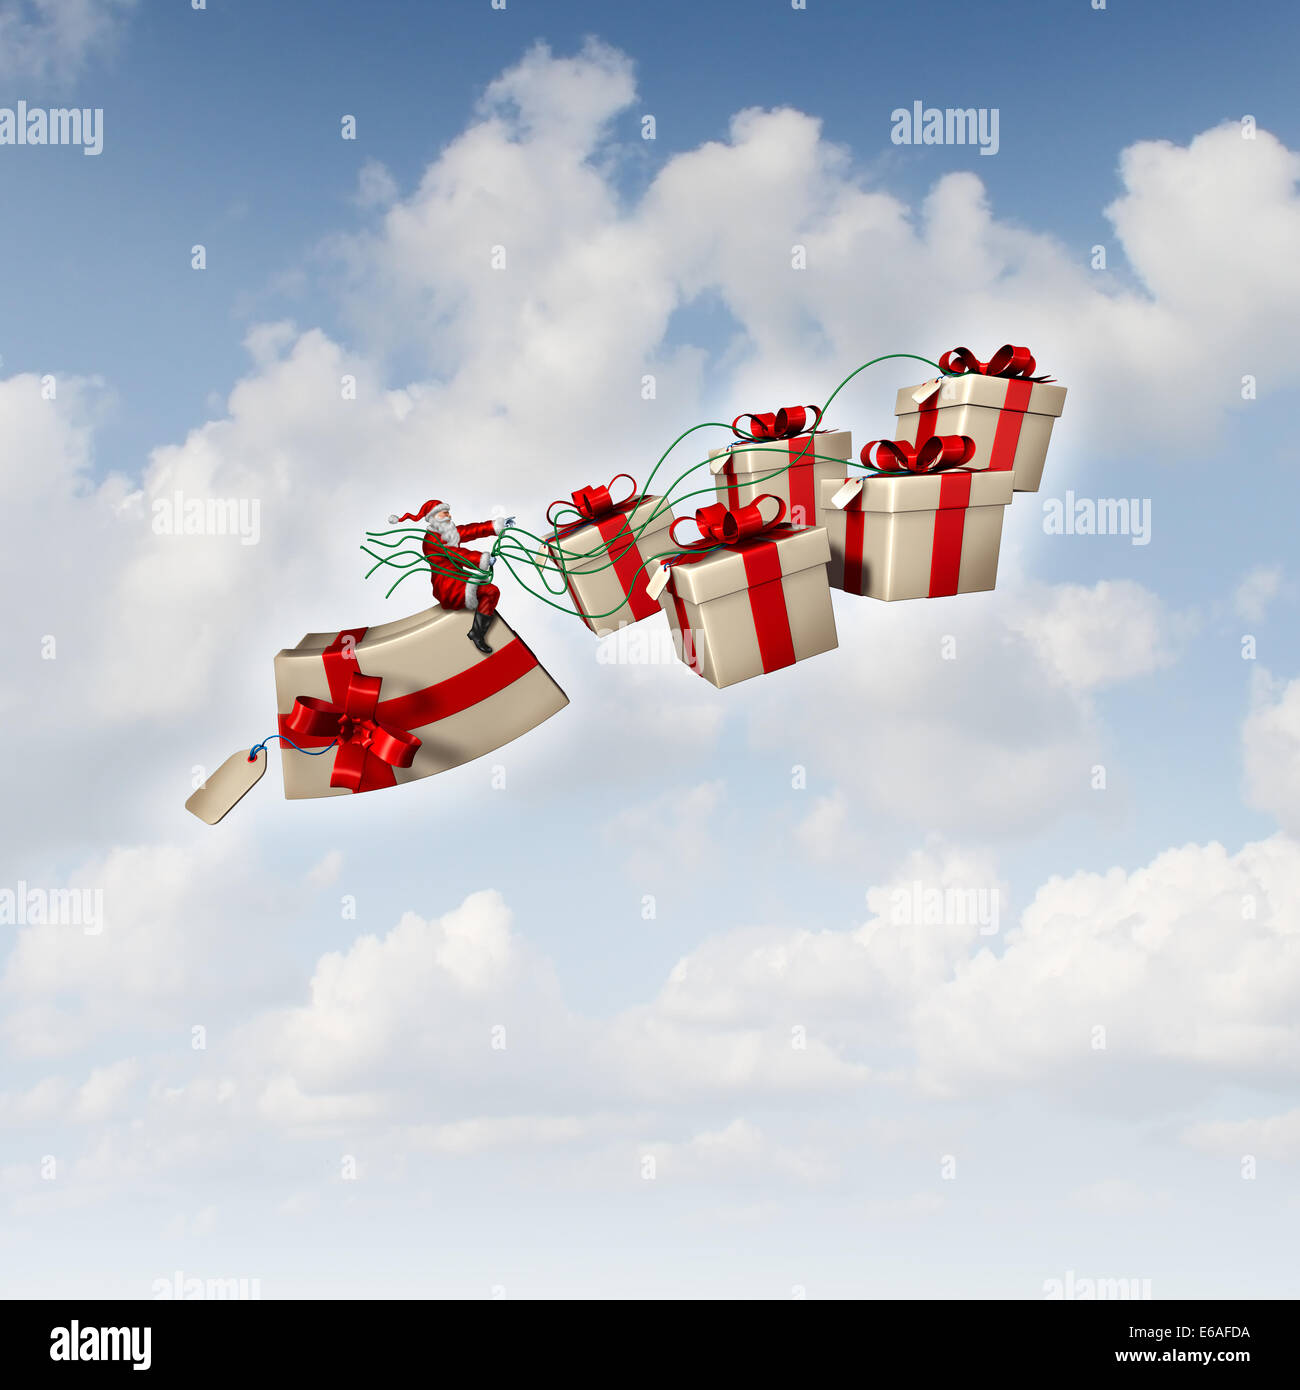 Christmas gift sled or santa sleigh concept as Santaclause riding a group of three dimensional presents with holiday silk ribbons as a traditional symbol of winter gift giving and seasonal festive icon for delivering joy to good boys and girls. Stock Photo